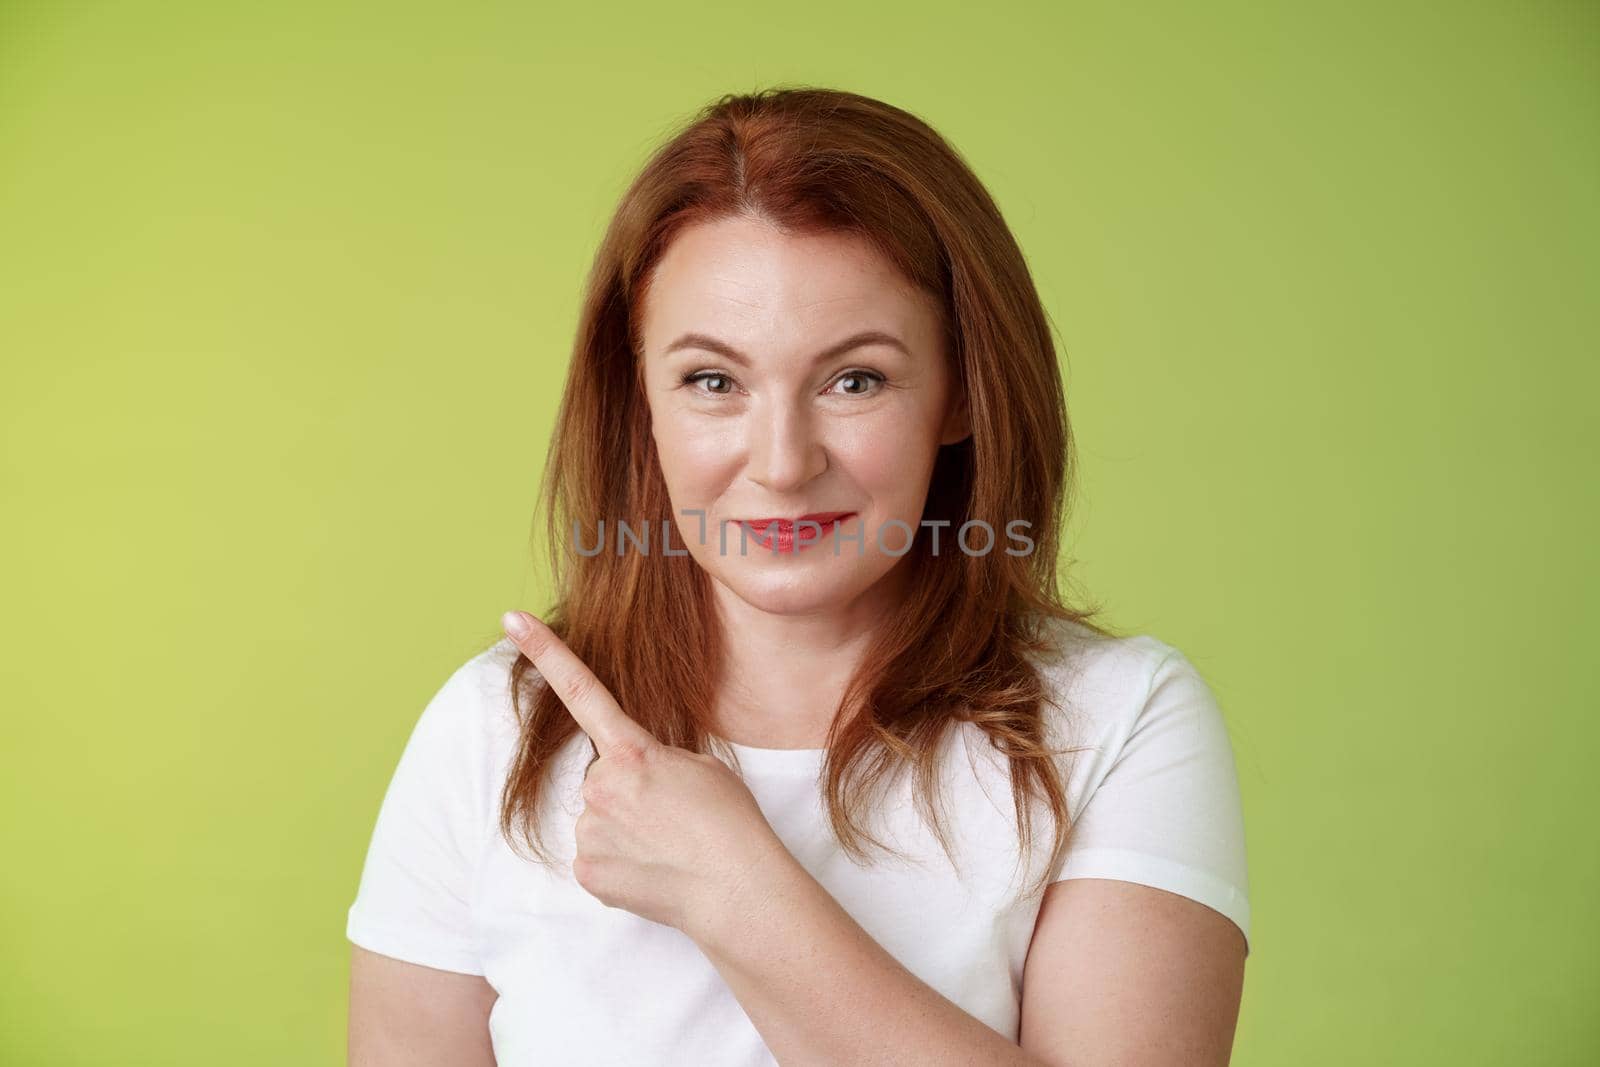 Kind cheerful good-looking middle-aged woman 50s redhead. white t-shirt smiling modest assured give advice pointing upper left corner indicating great promotion advertising product green background.